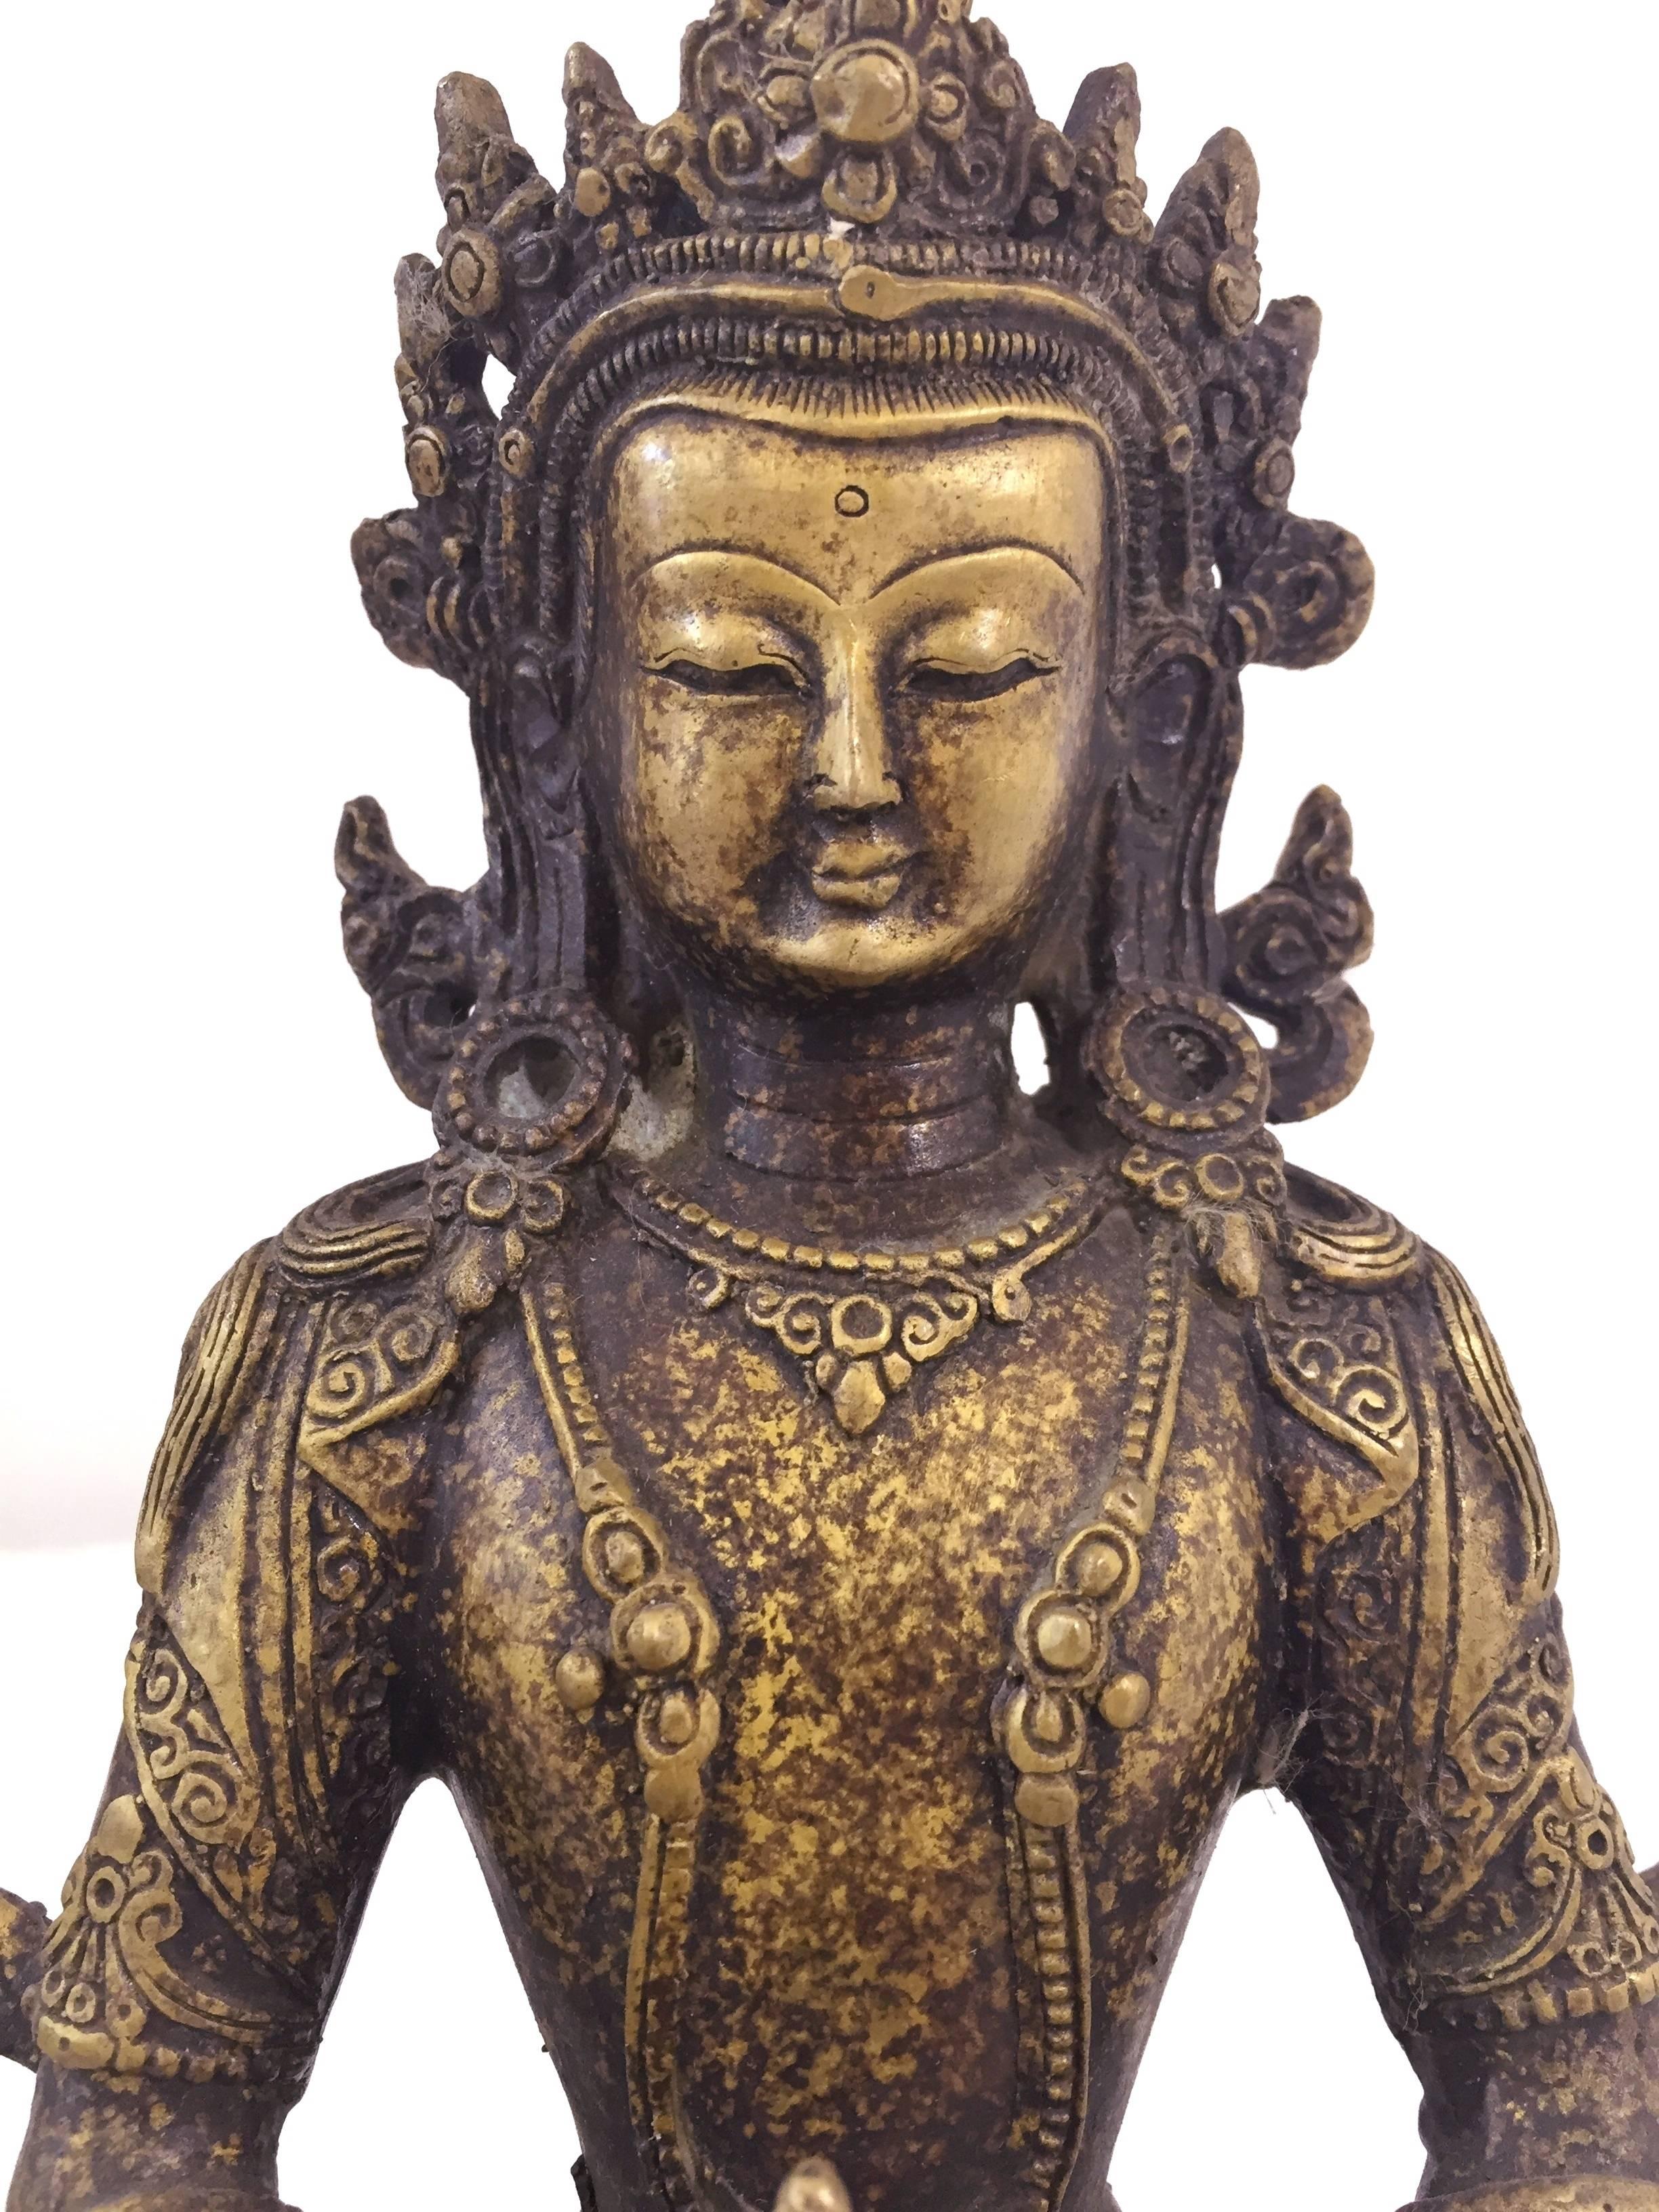 The Tara is the Goddess of compassion. She is widely believed to come to a person's aid when in need, grants wishes and brings blessings. This fine piece depicts the Tibetan Tara seated on lotus throne holding a bottle of wisdom nectar. Her bodice